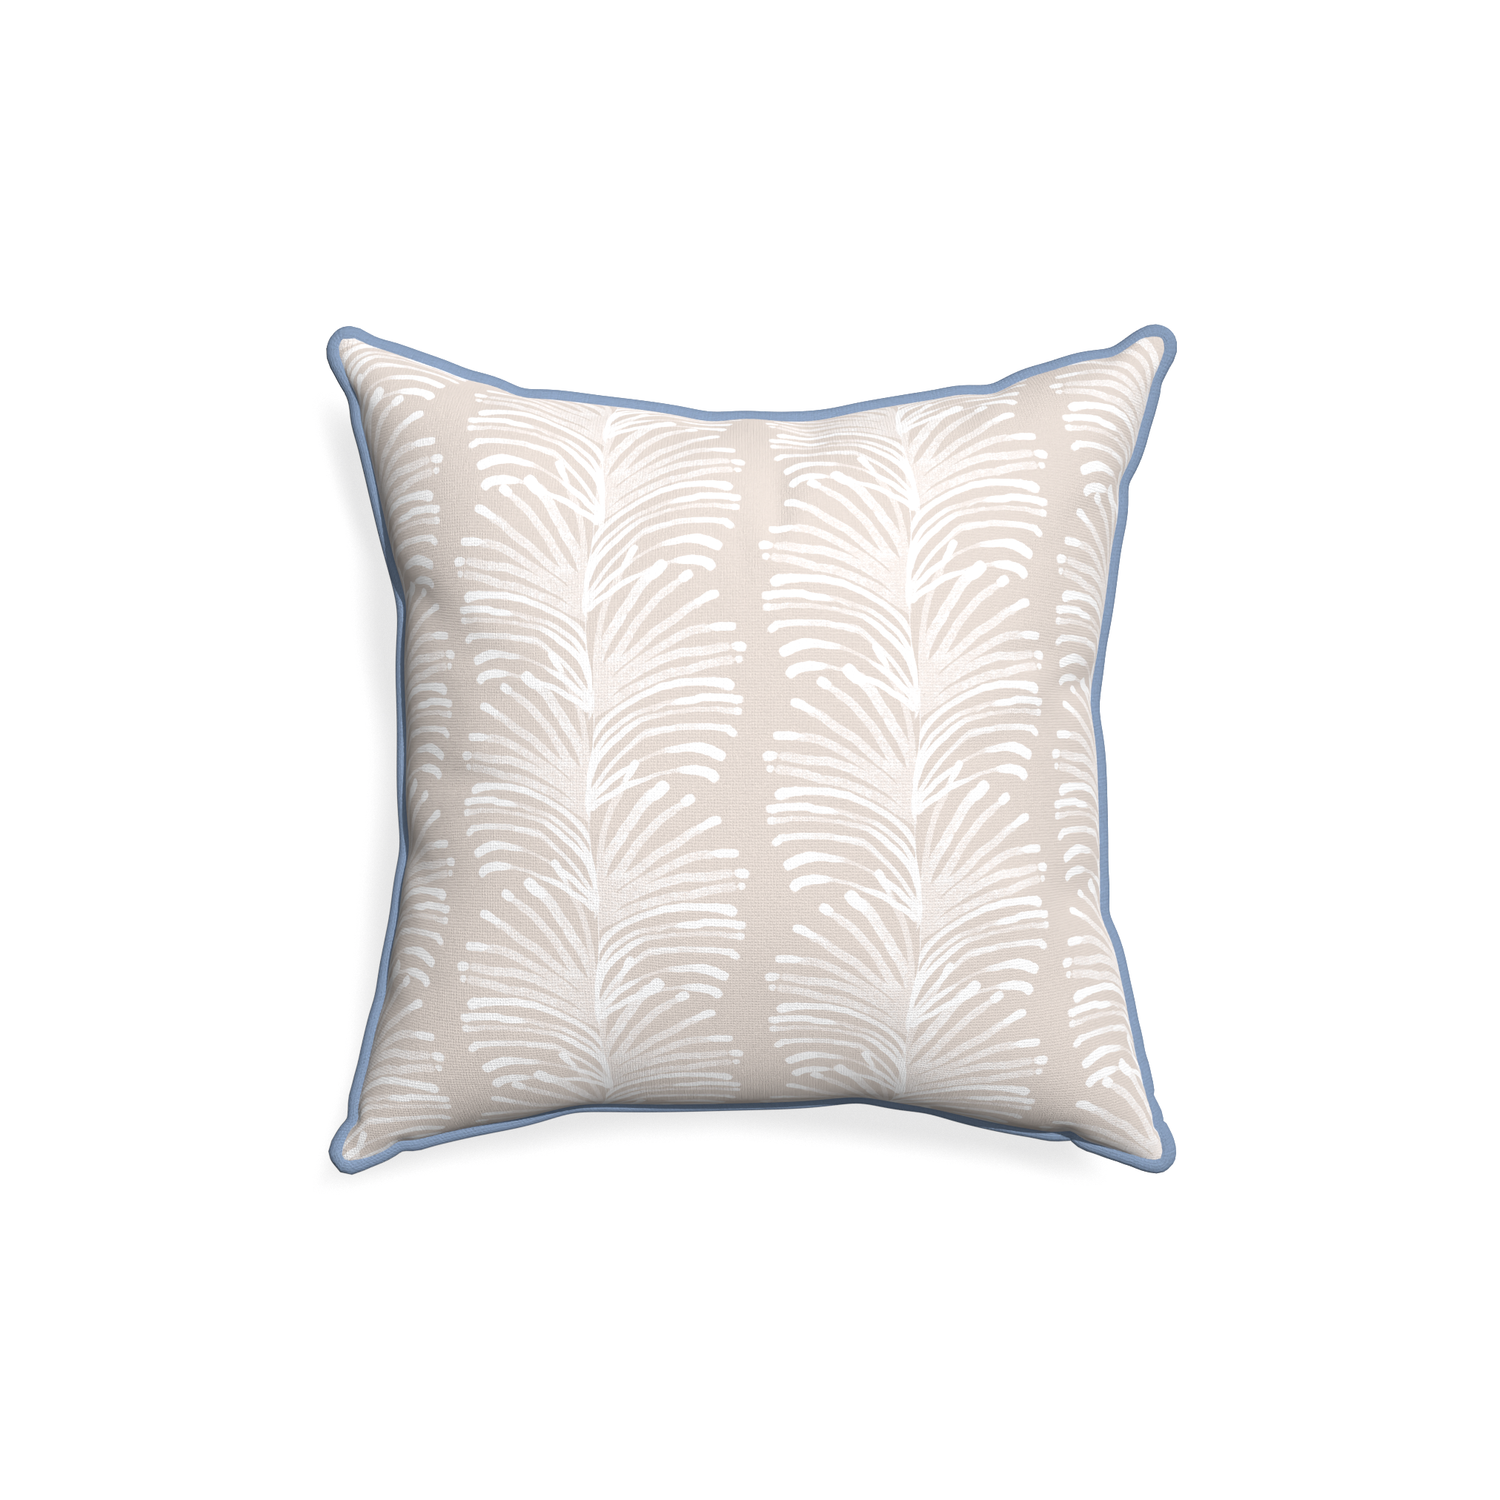 18-square emma sand custom sand colored botanical stripepillow with sky piping on white background